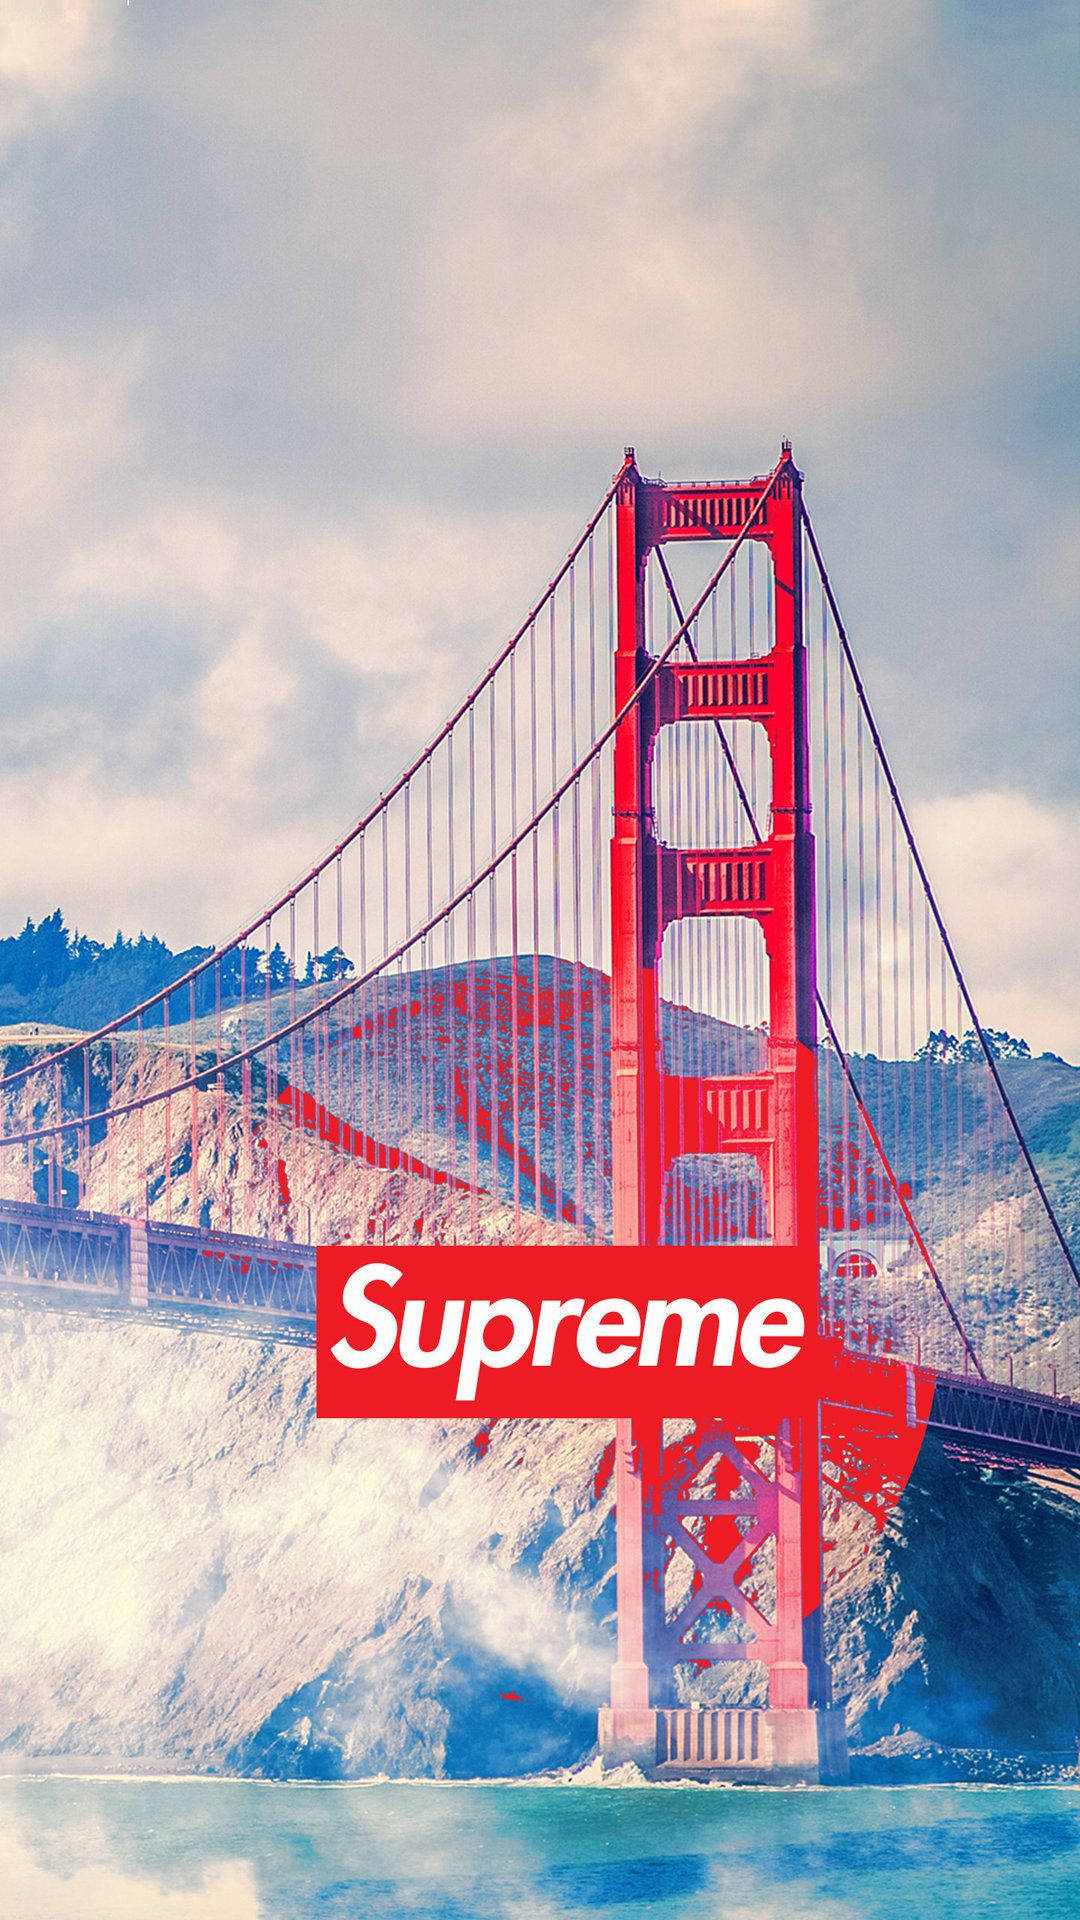 100+] Red Supreme Backgrounds